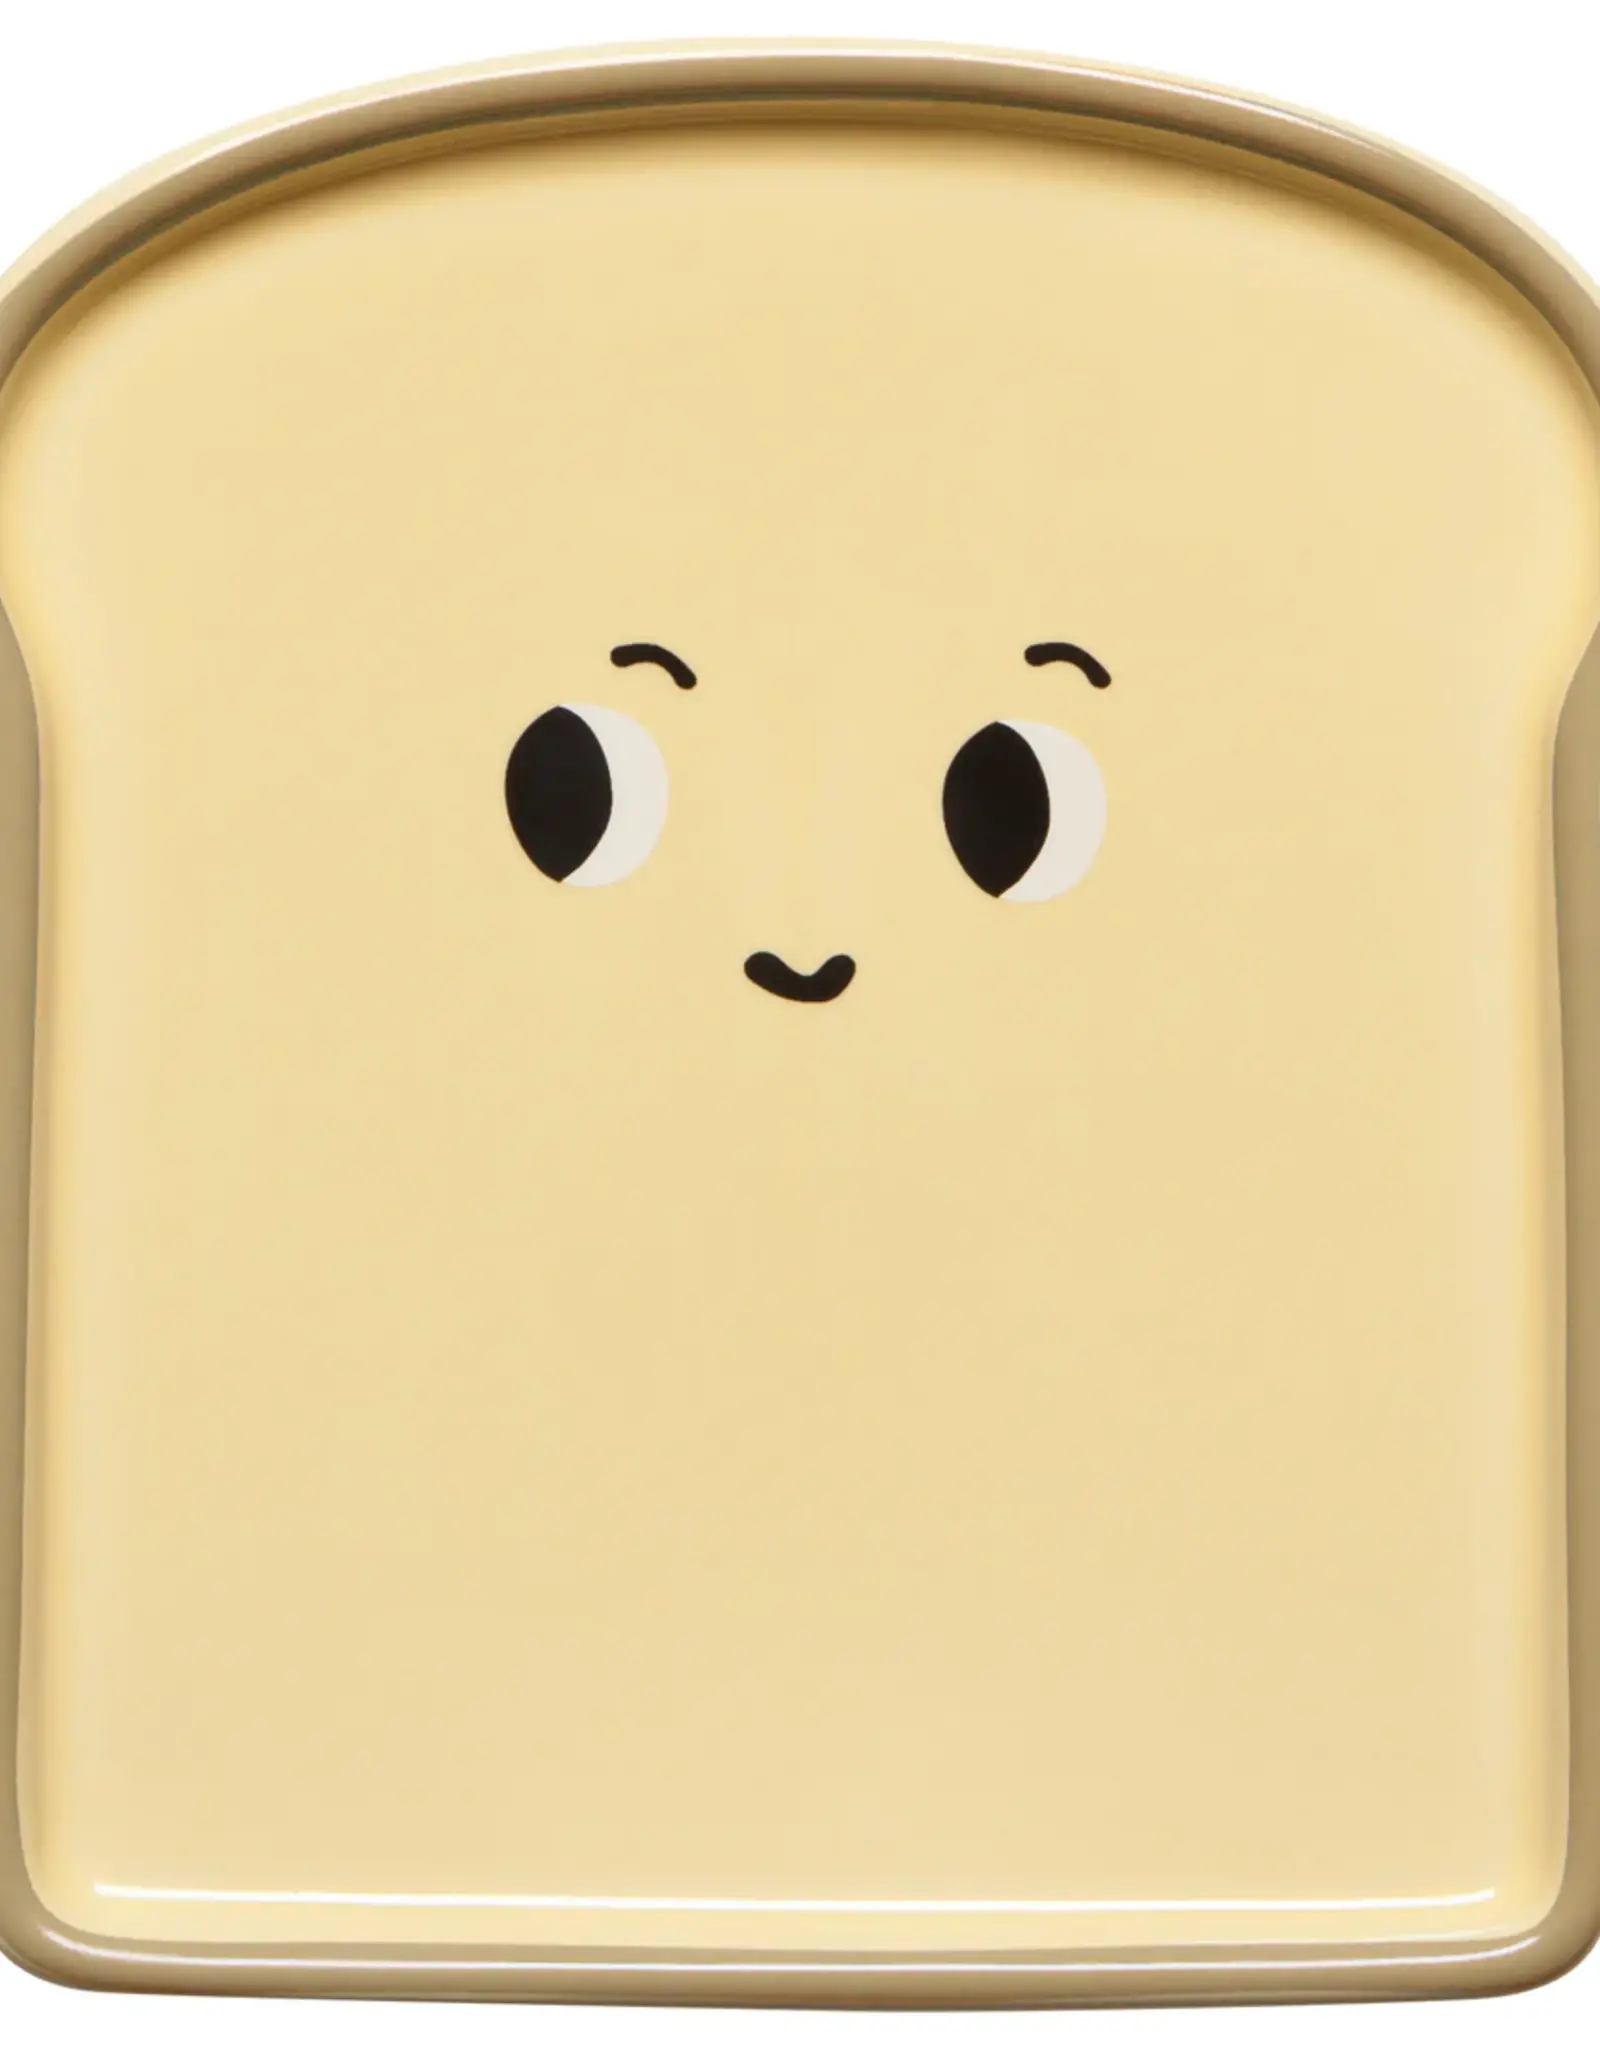 Danica + Now Designs Shaped Dish - Funny Food: Toast